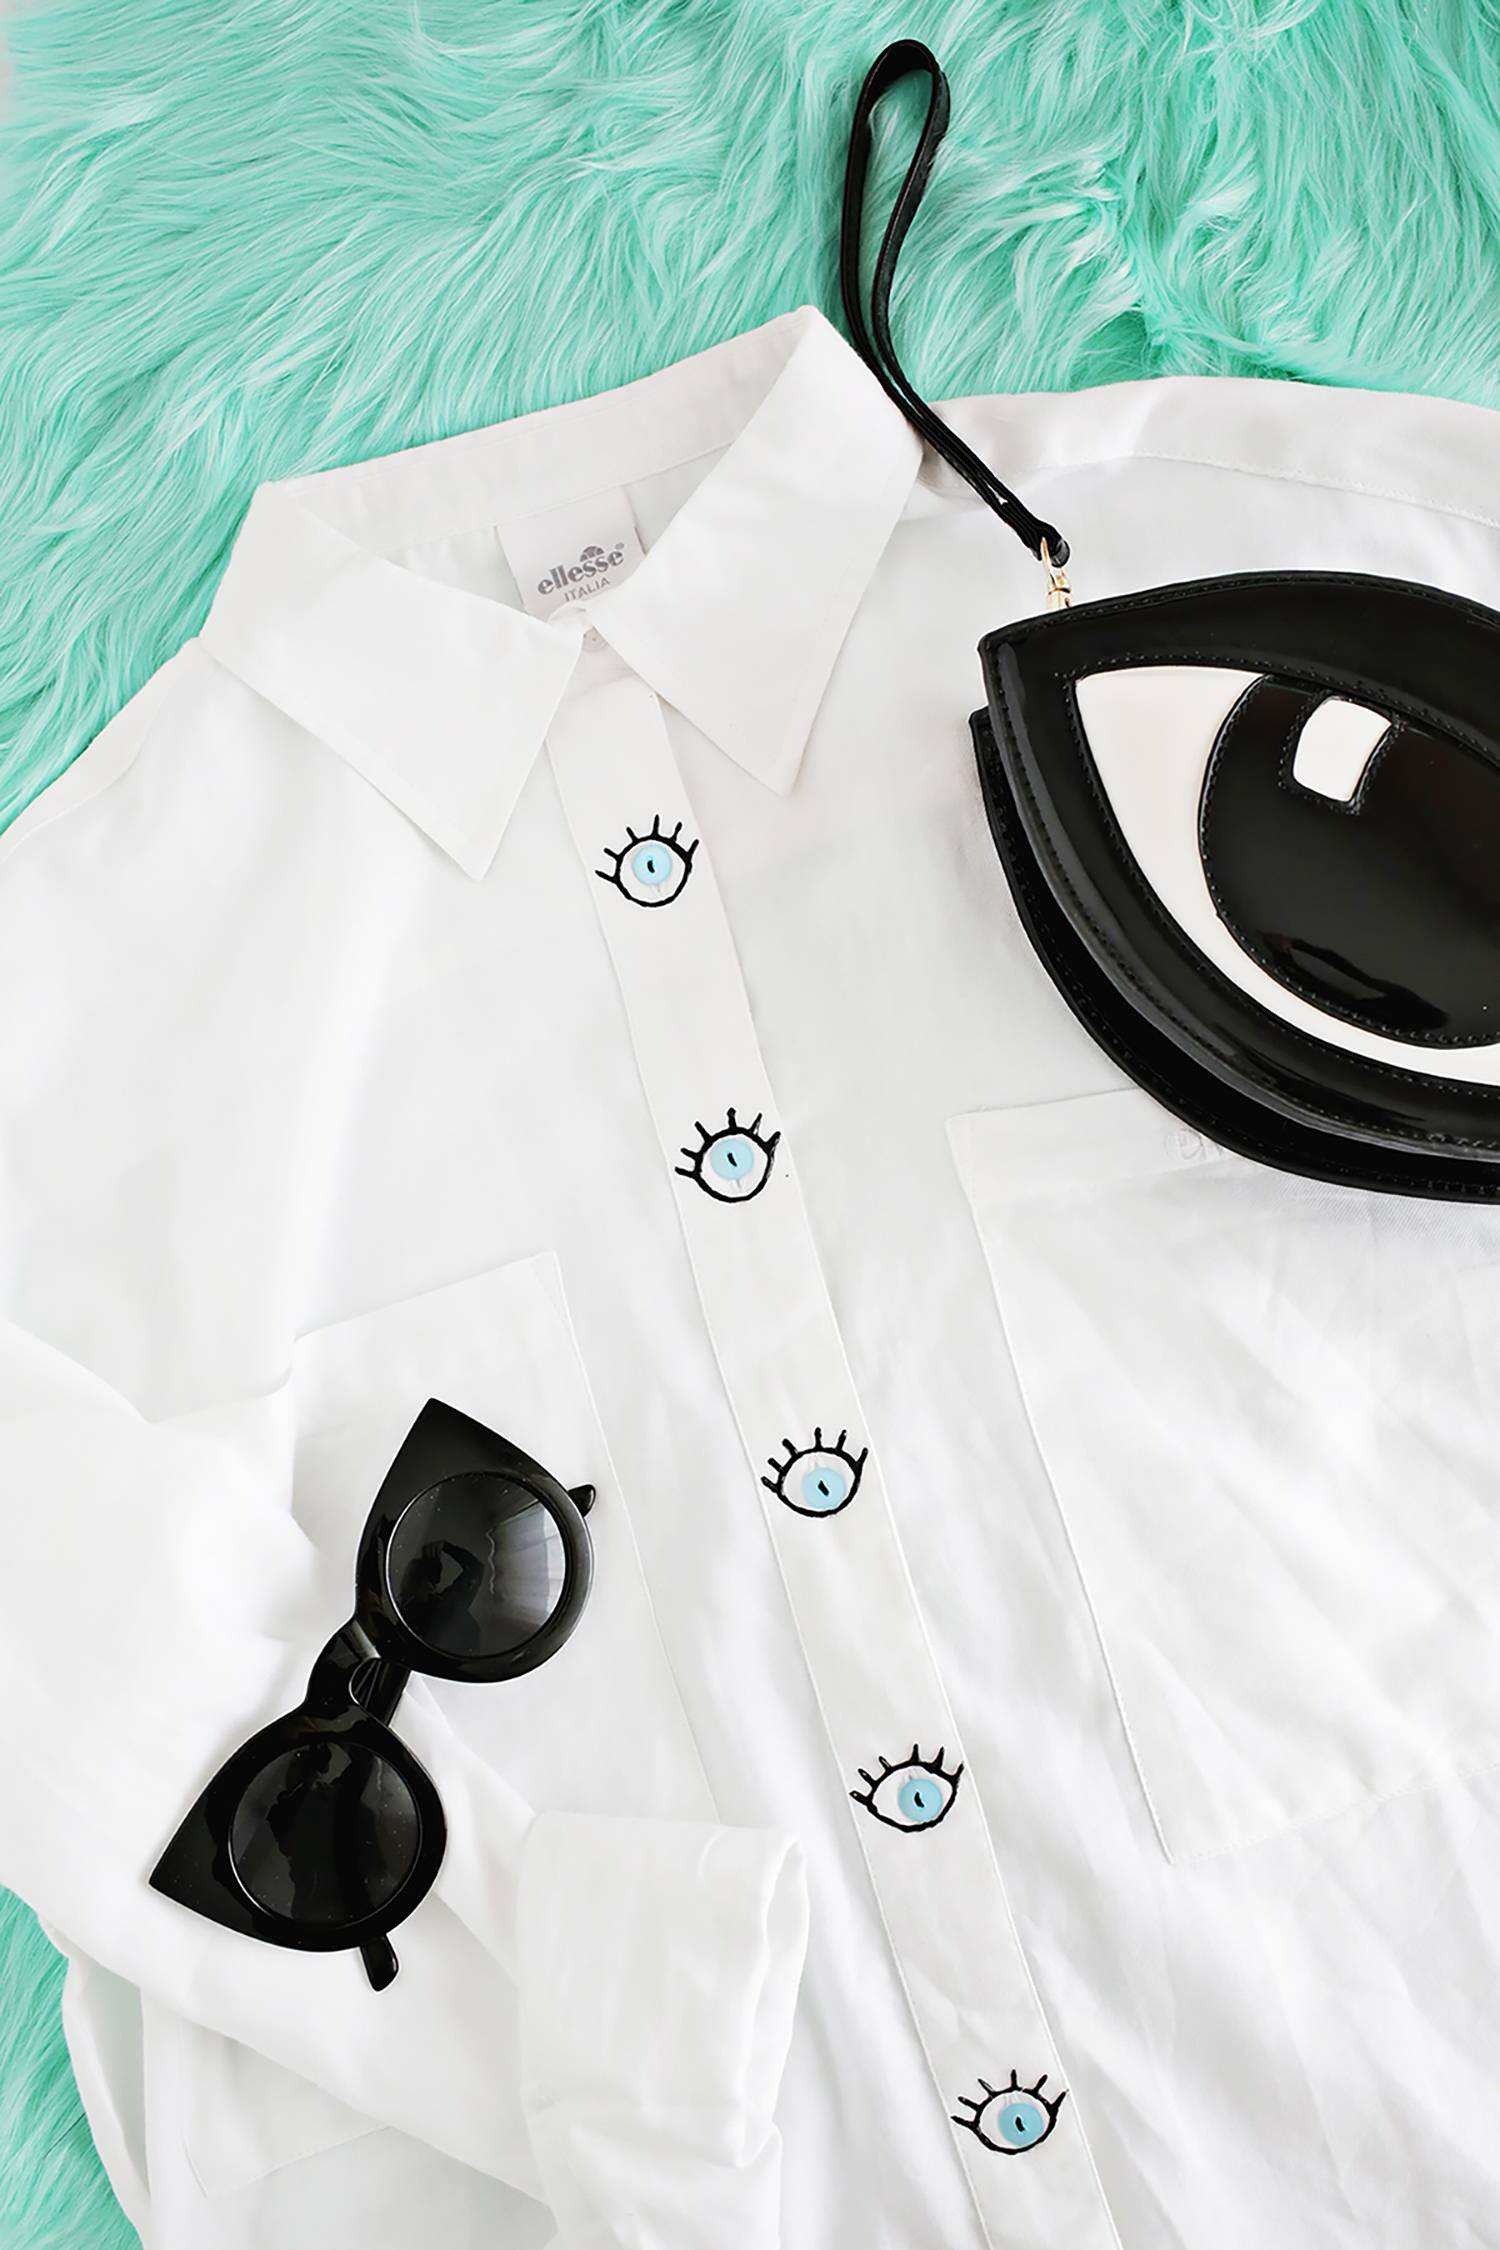 A white button up shirt with eye ball and eye lashes for the buttons, a pair of black sunglasses and a black handbag shaped like an eye.